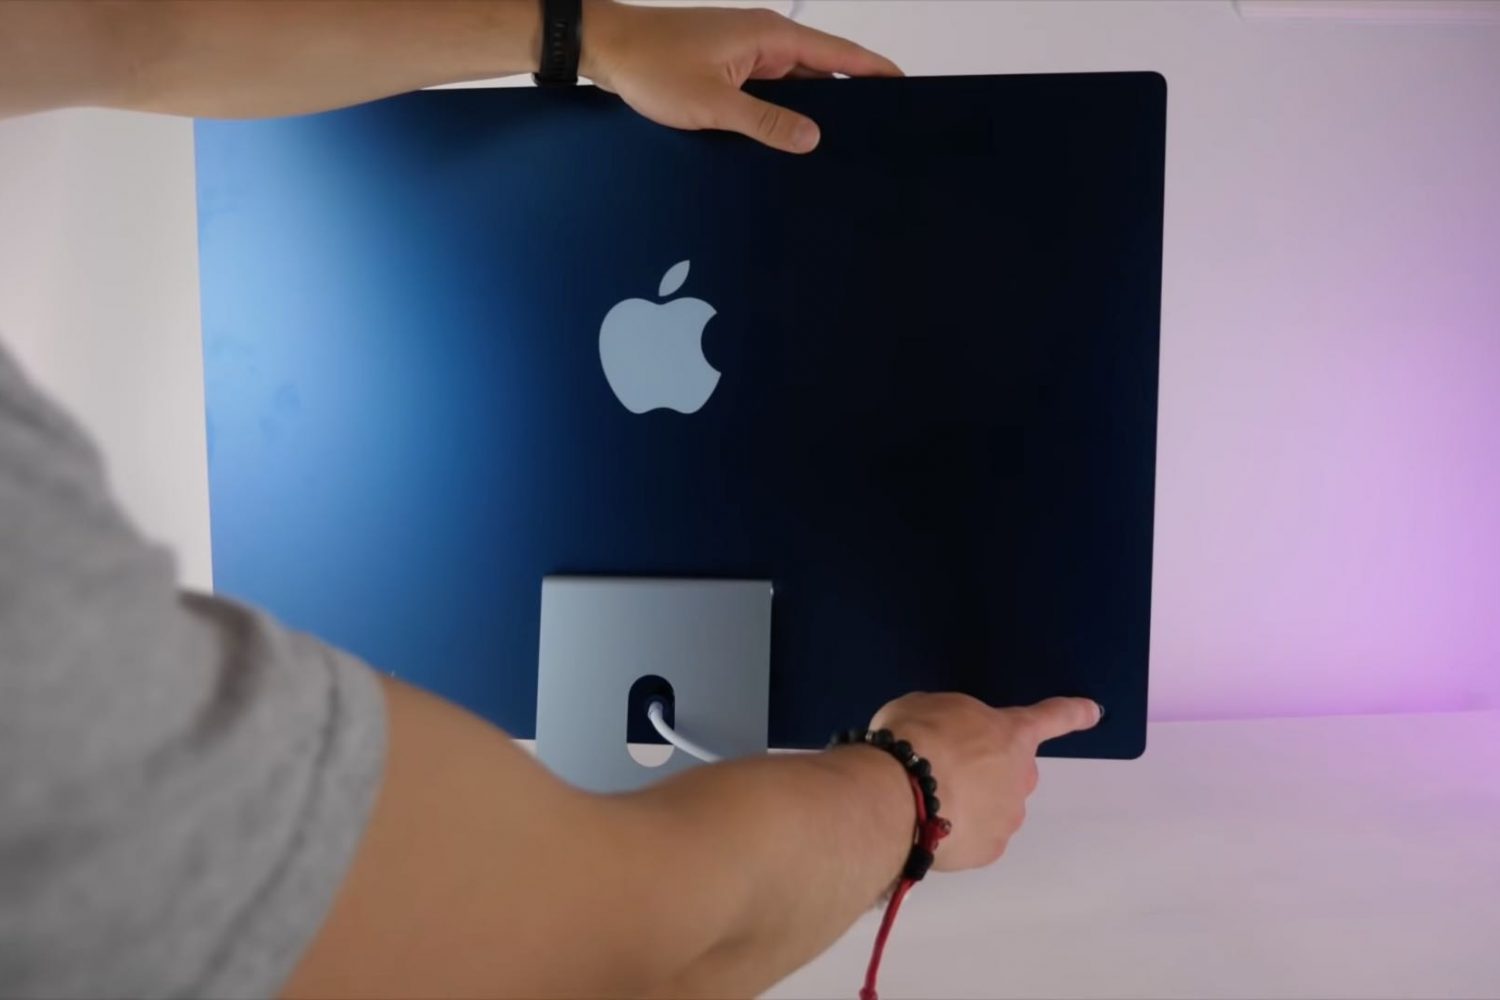 A photograph showing the backside of a blue 24-inch Apple M1 iMac computer with a finger touching the power button